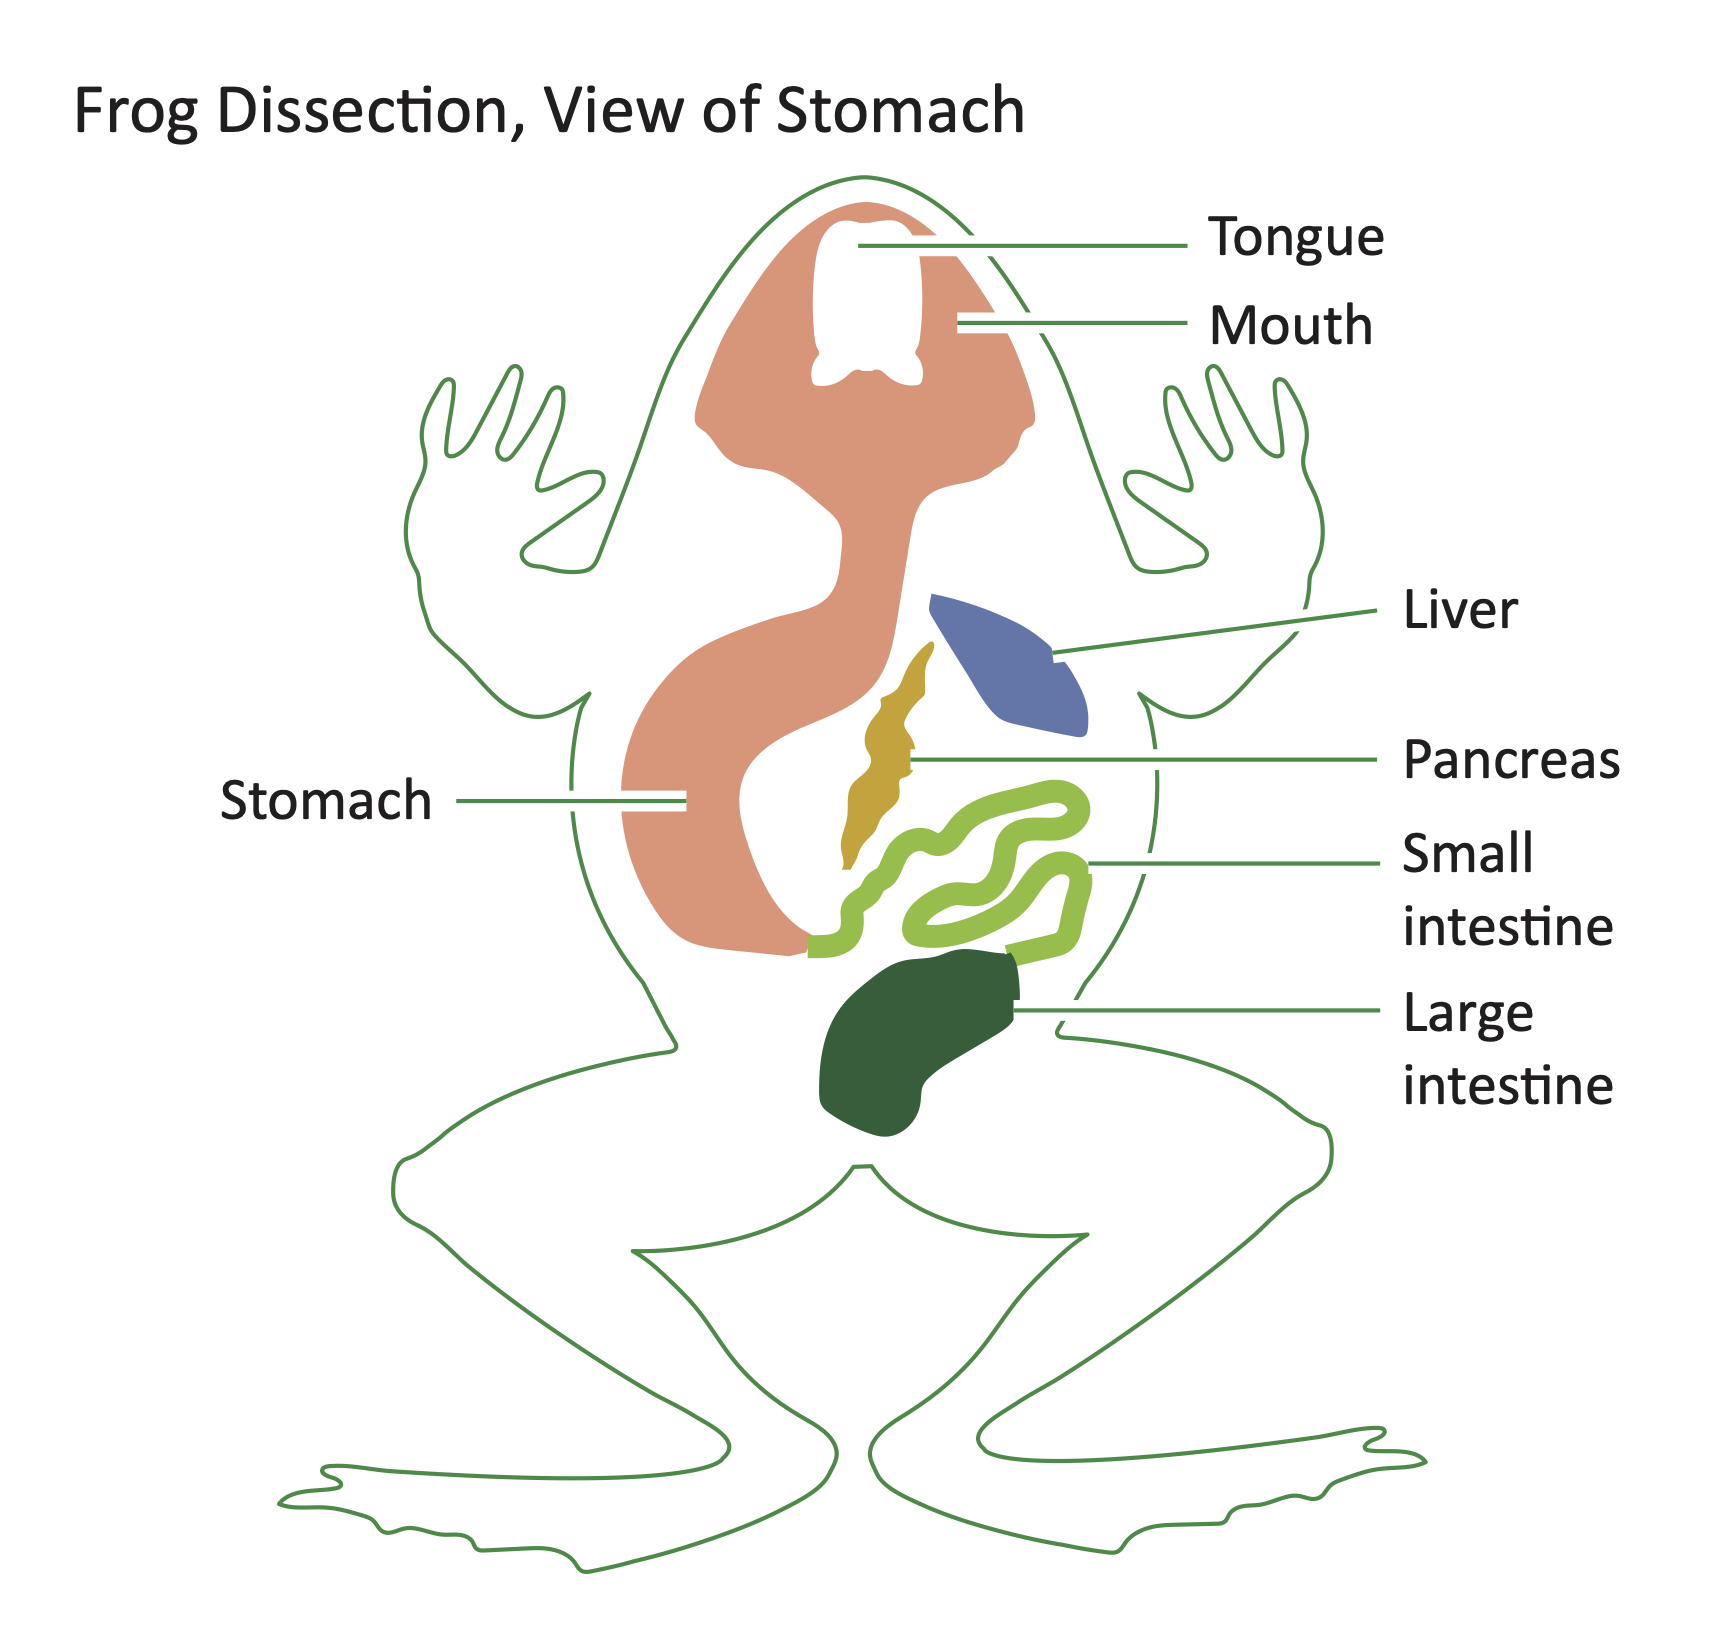 Basic diagram illustrating the internal structure of a dissected frog. The head includes the tongue and mouth, which are connected to the stomach which is connected to the small intenstine then the large intestine. Next to the stomach is the liver and pancreas.